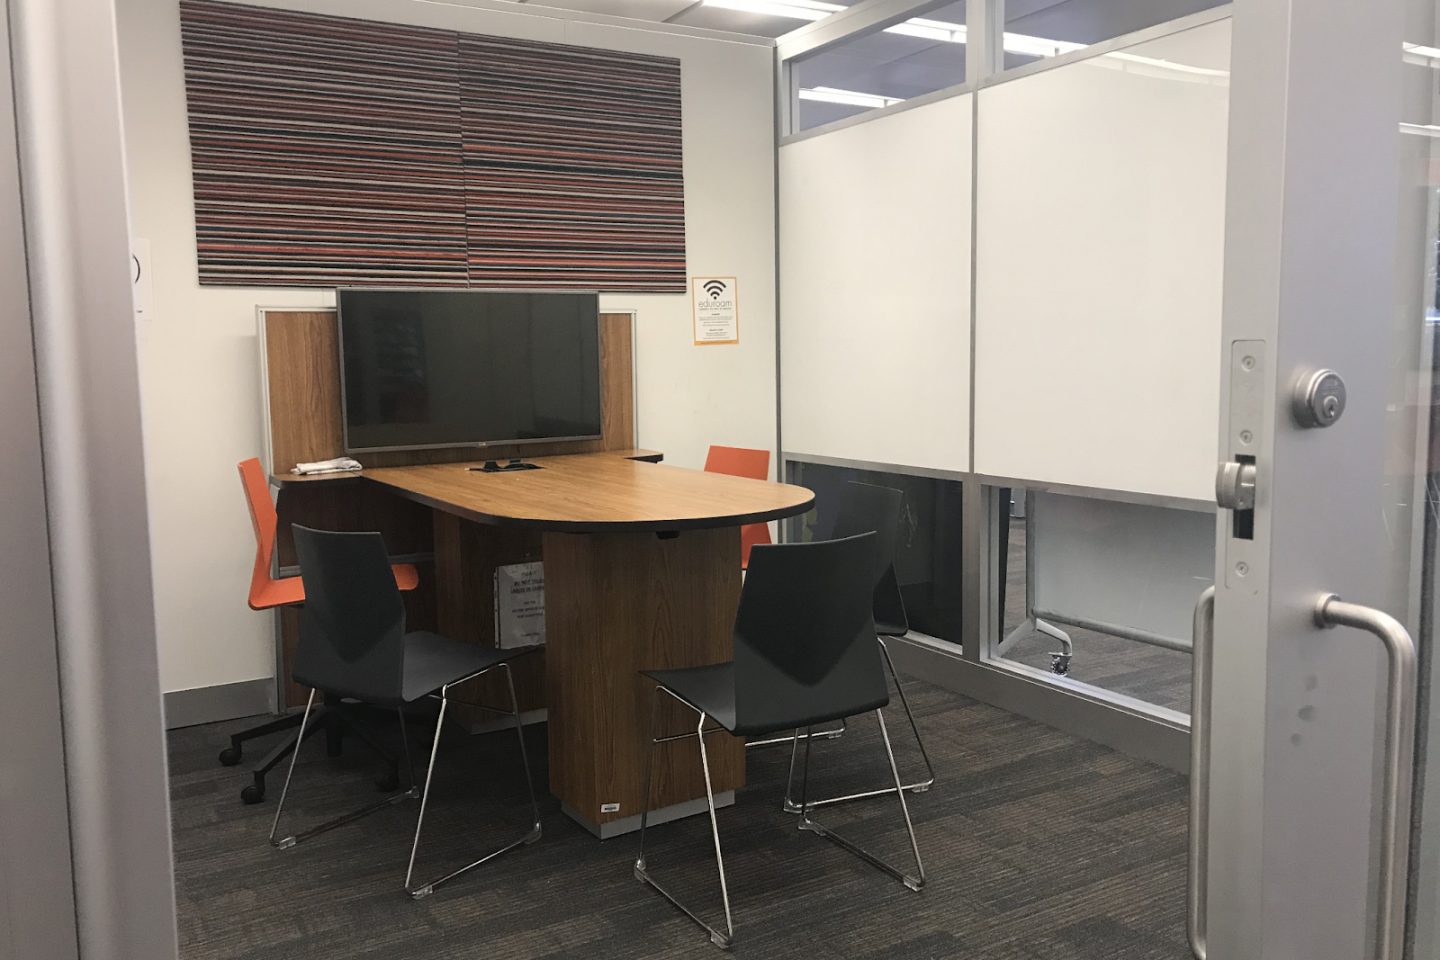 A peek inside a collaboration studio pod, showing a screen, deak and seating for group study